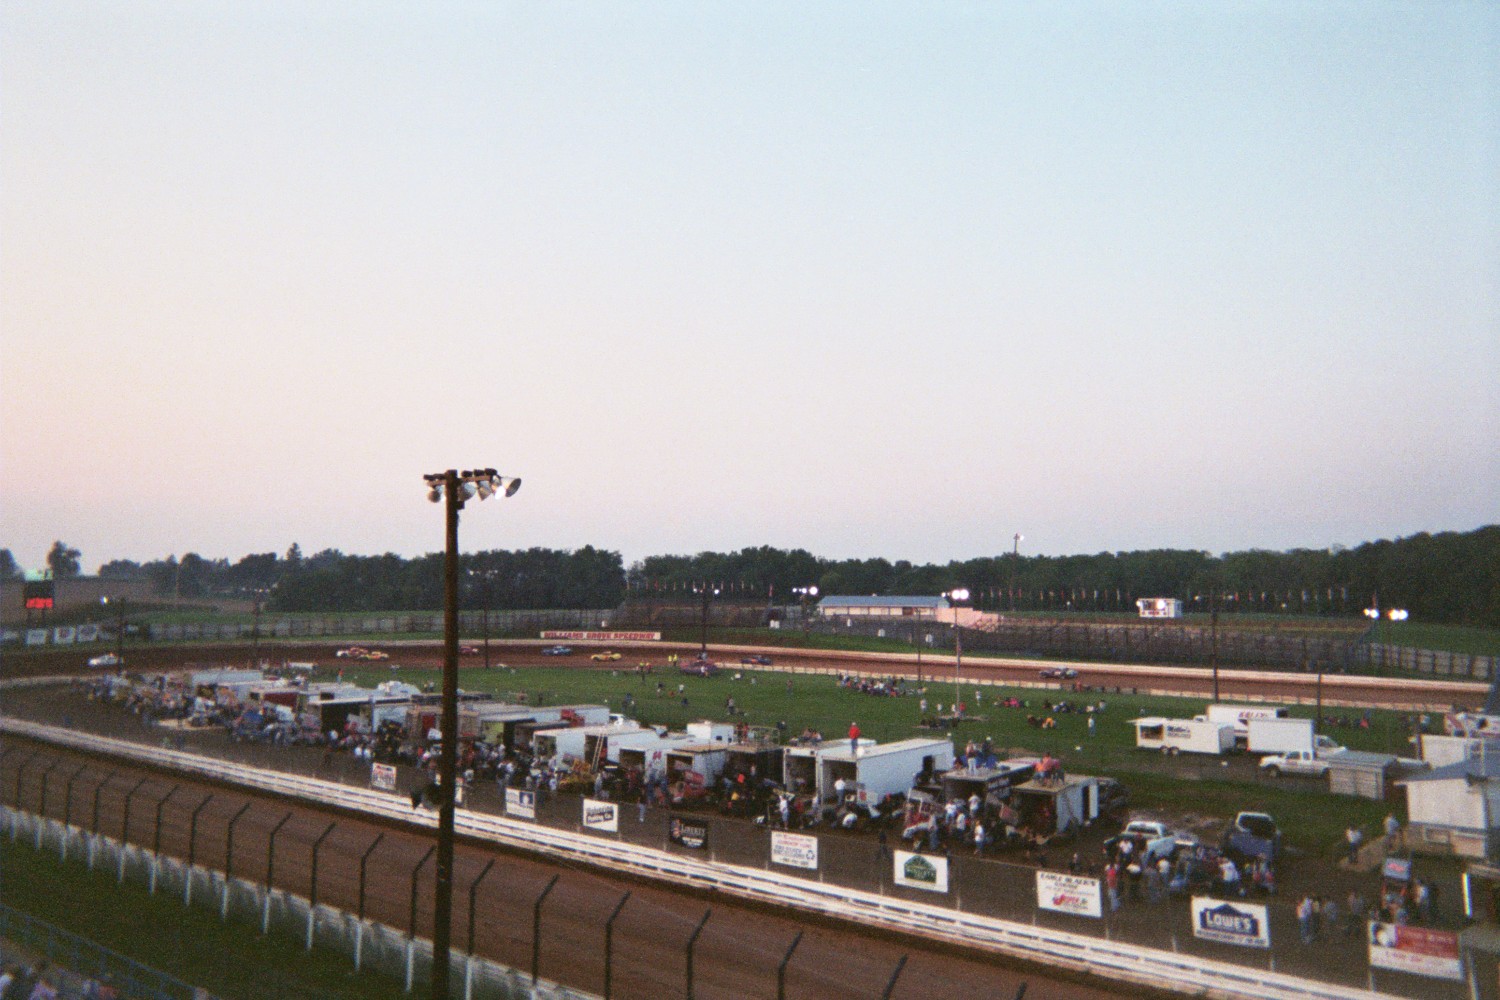 Williams Grove ..prior to racing on the final Saturday night show of 2006
